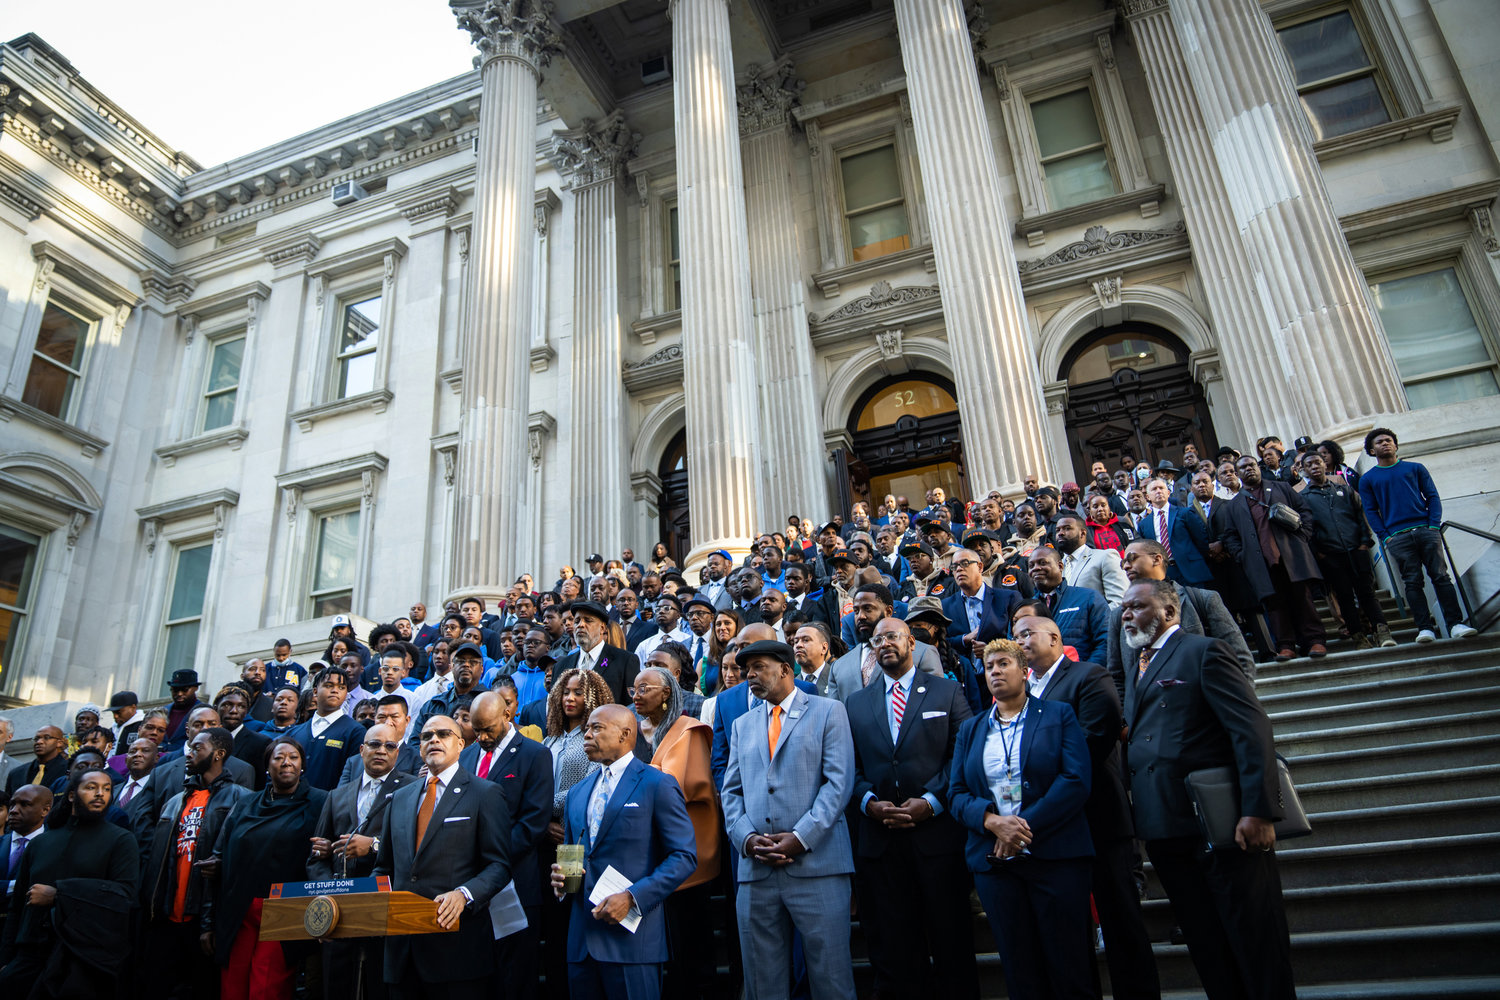 Mayor Eric Adams and New York City Department of Education Chancellor David Banks announce Project Pivot on the Tweed Courthouse steps in Manhattan on Oct. 6, 2022.